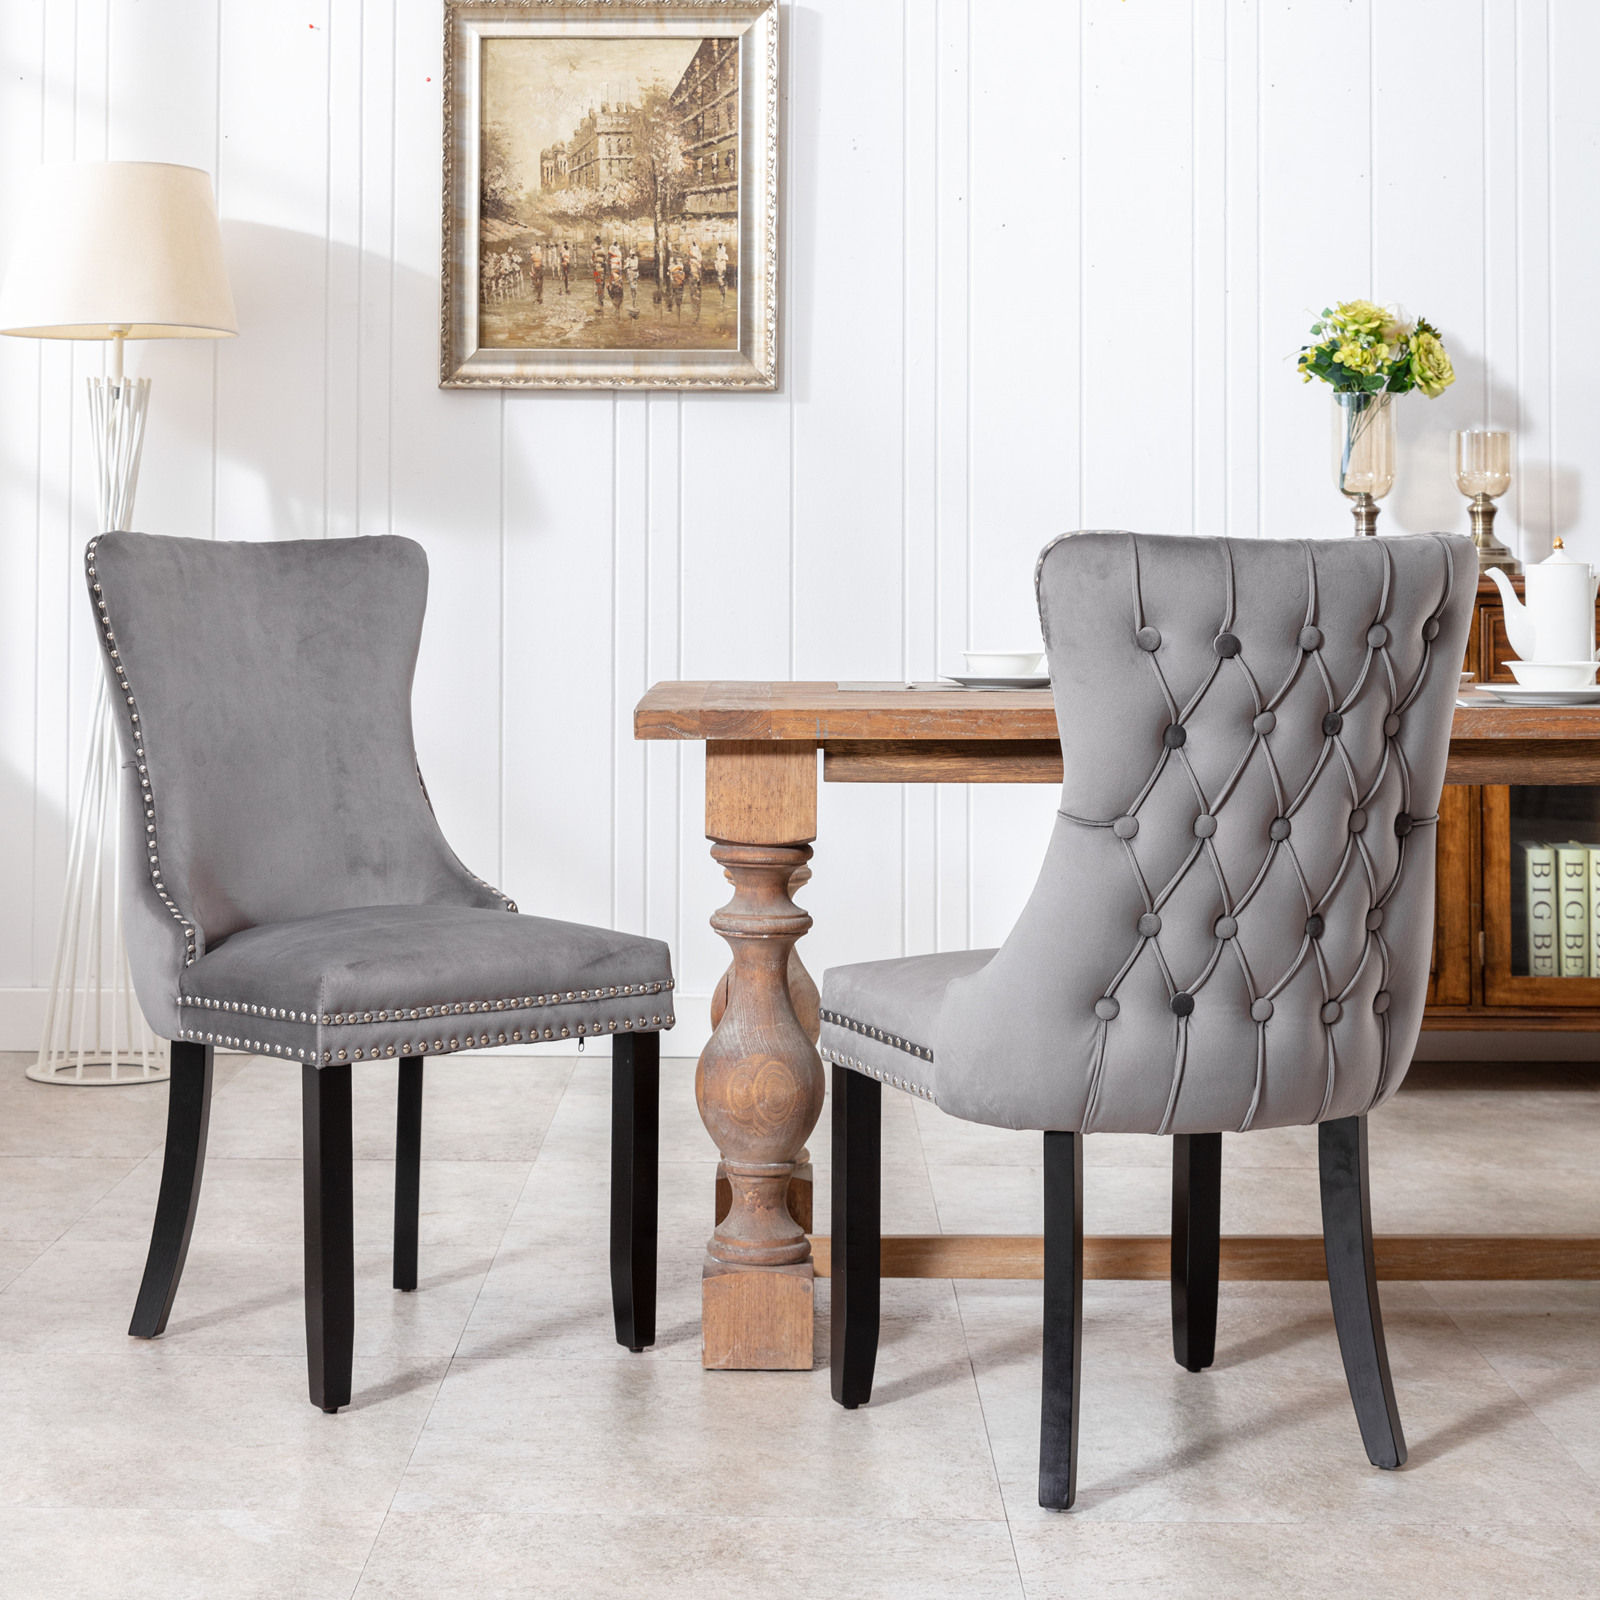 AA Furniture,Upholstered Wing-Back Dining Chair with Backstitching Nailhead Trim and Solid Wood Legs,Set of 2, Gray-Boyel Living